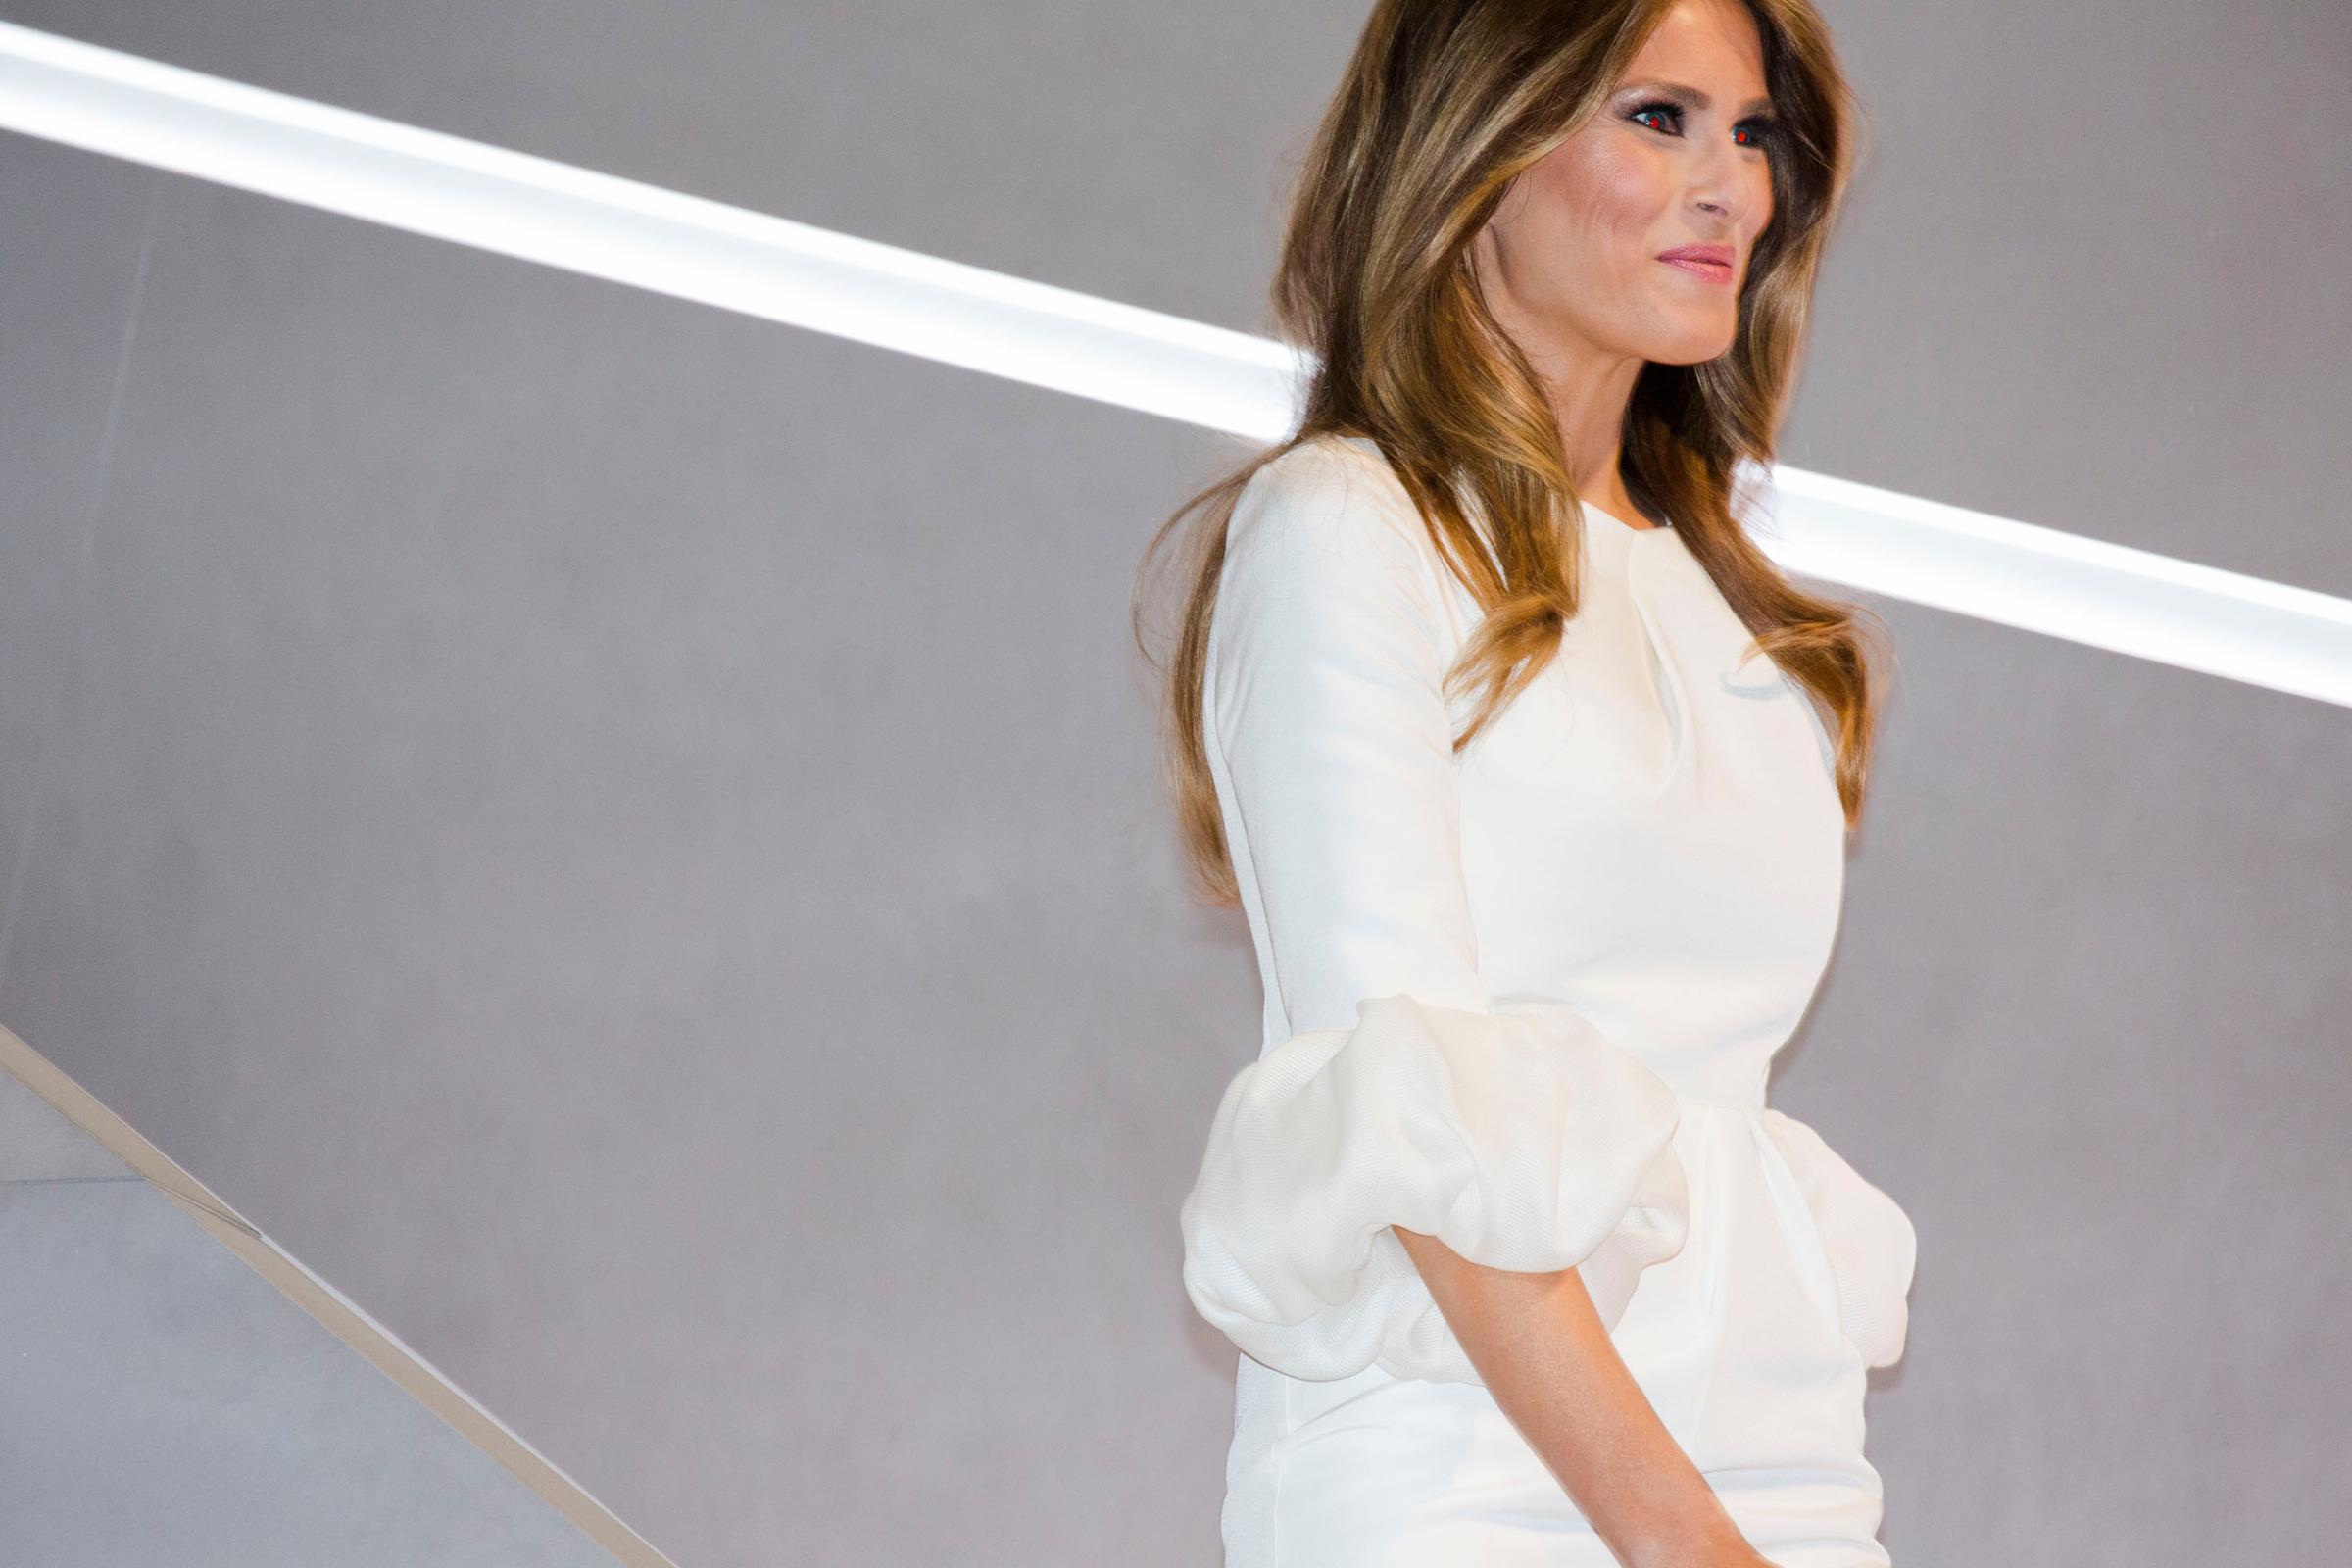 Melania Trump at the 2016 Republican National Convention on Monday, July 18, 2016, in Cleveland.